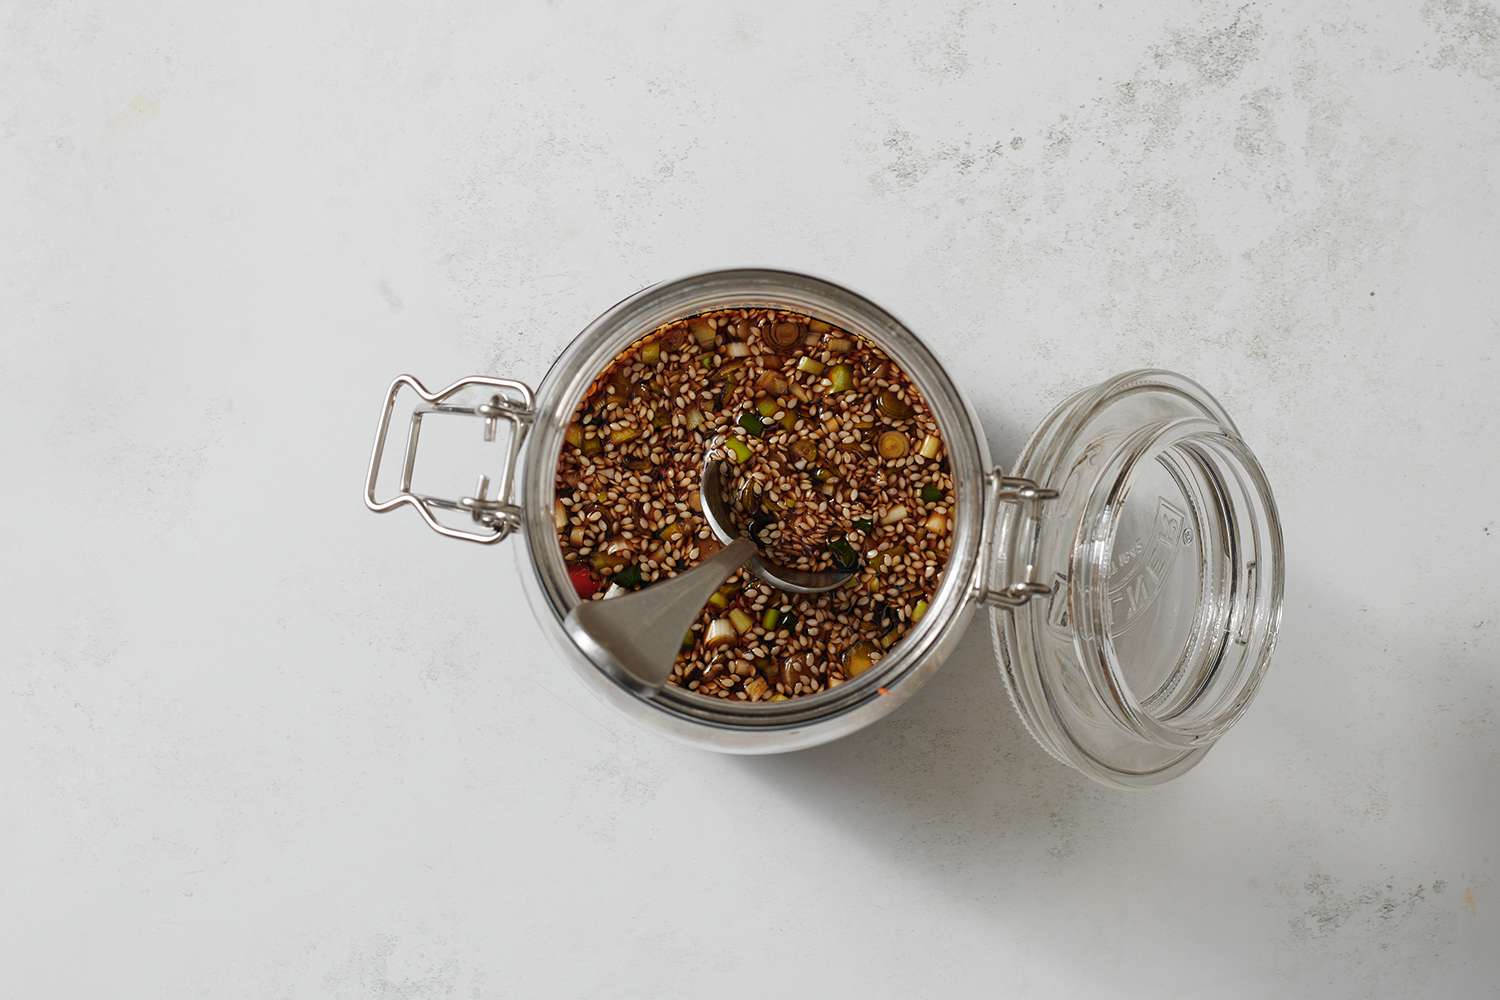 A jar of soy sauce, water, aged soy sauce, balsamic vinegar, sugar, scallions, chiles, and sesame seeds and garlic